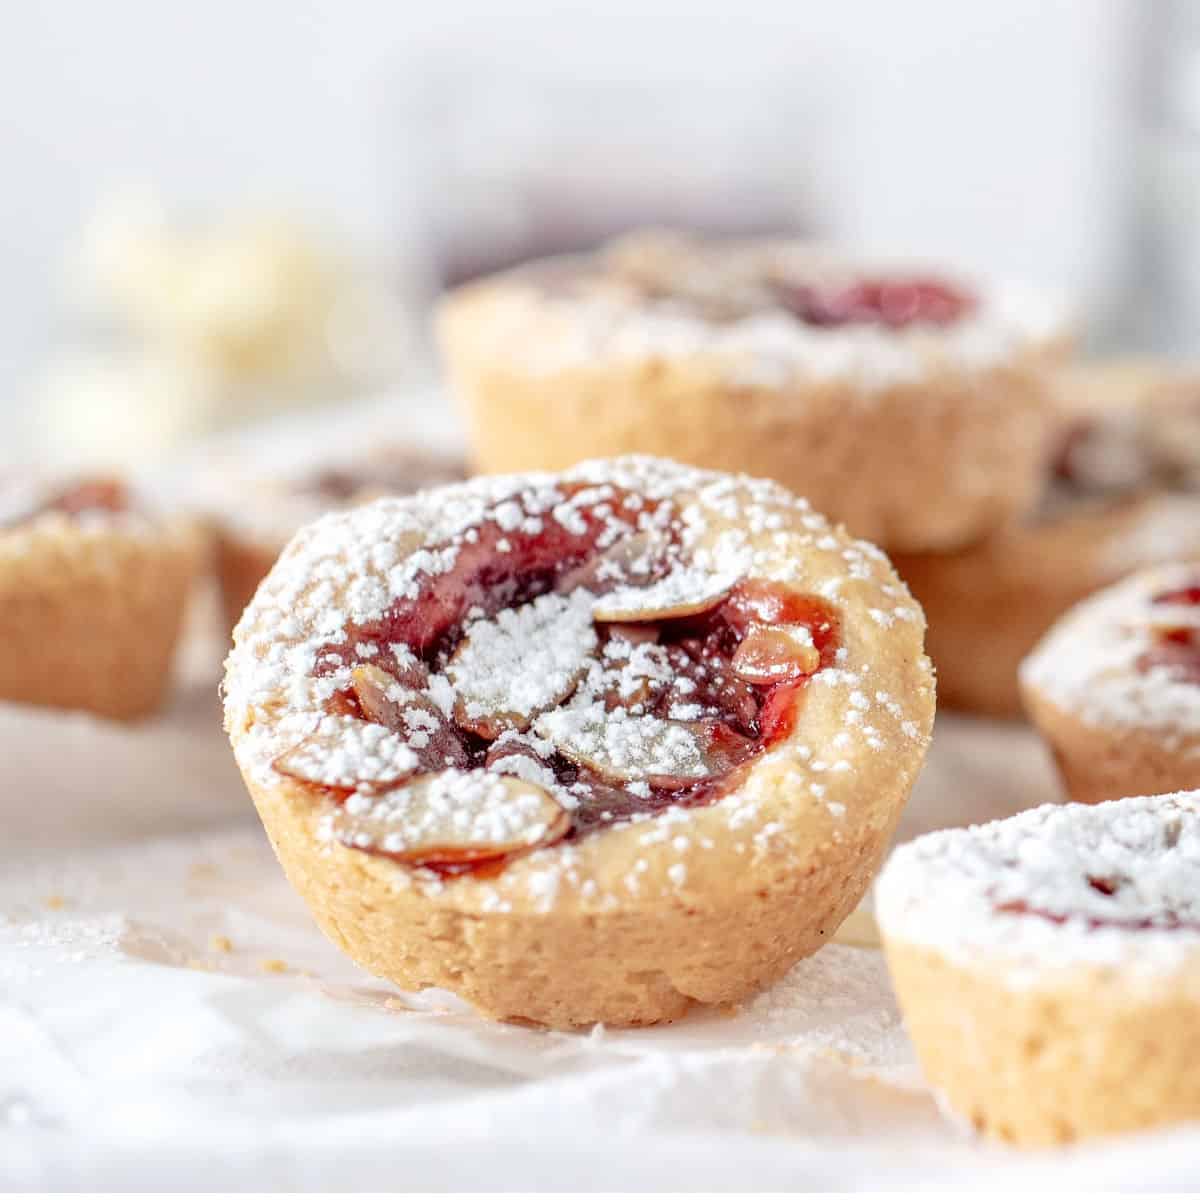 Single raspberry jam tart with almonds and powdered sugar among more blurred ones.